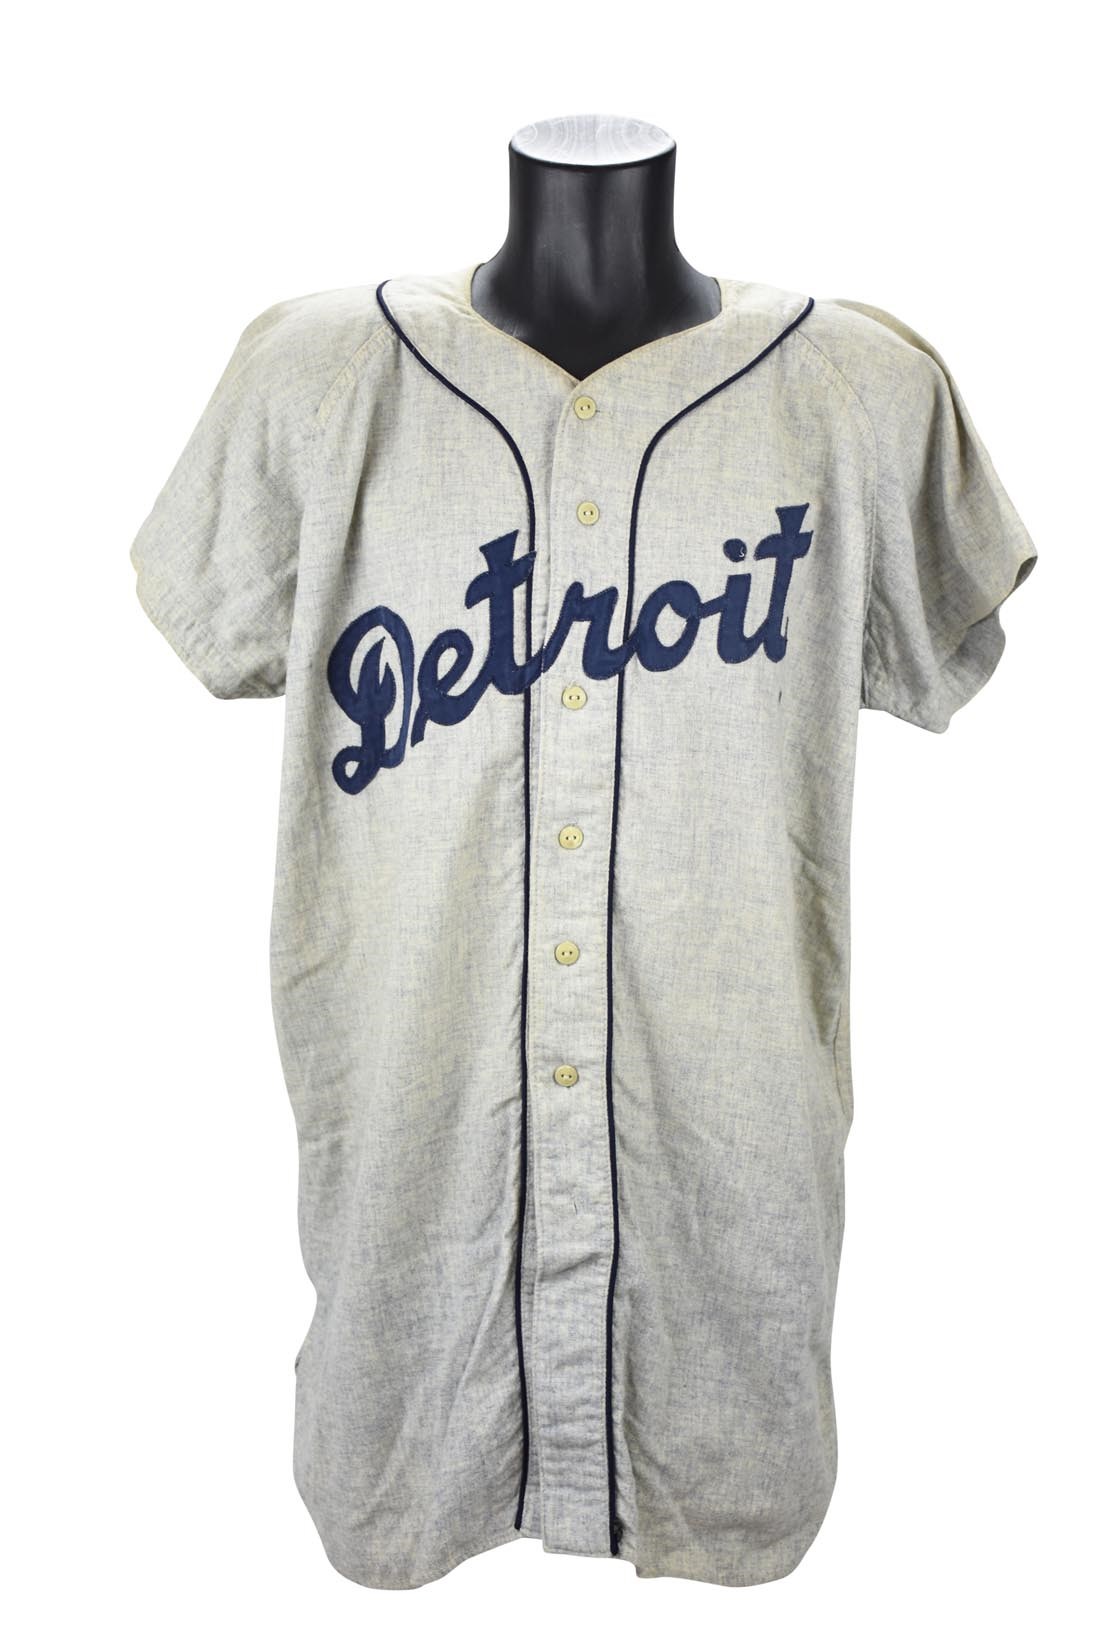 Ty Cobb and Detroit Tigers - 1958 Bill Taylor Detroit Tigers Game Worn Jersey